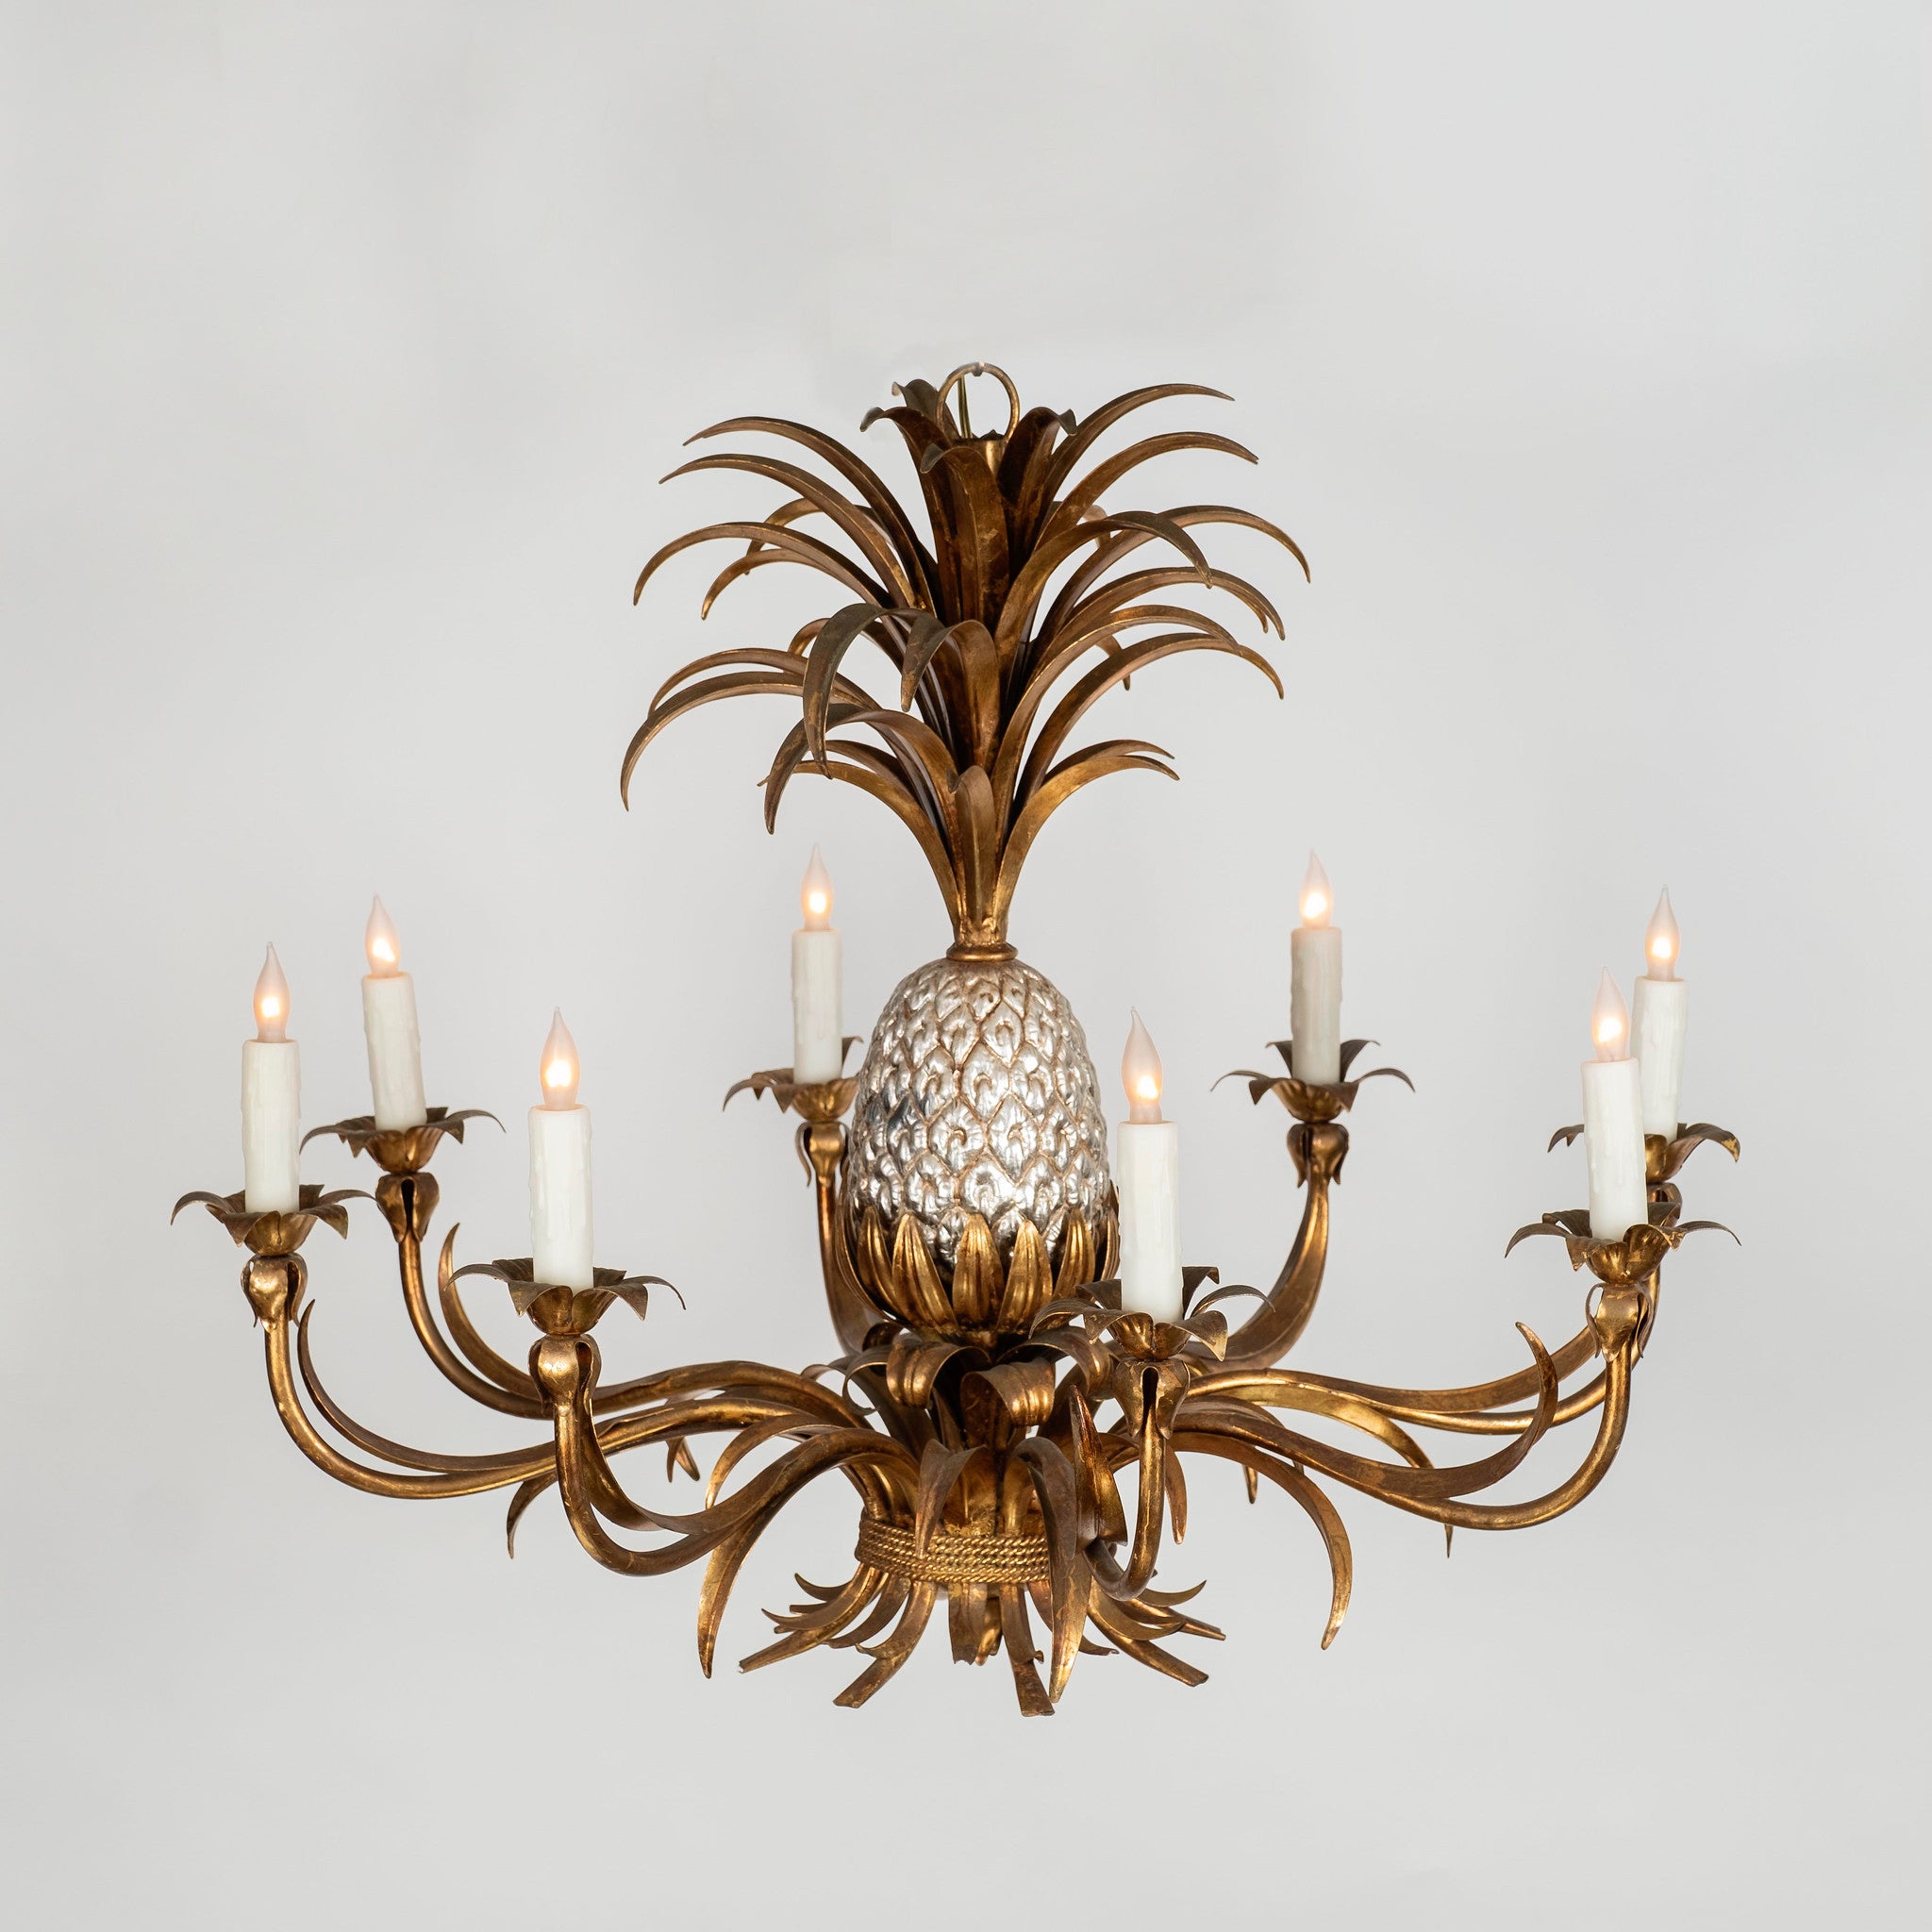 17th Century style six branch gilded-bronze 'Pineapple' Chandelier